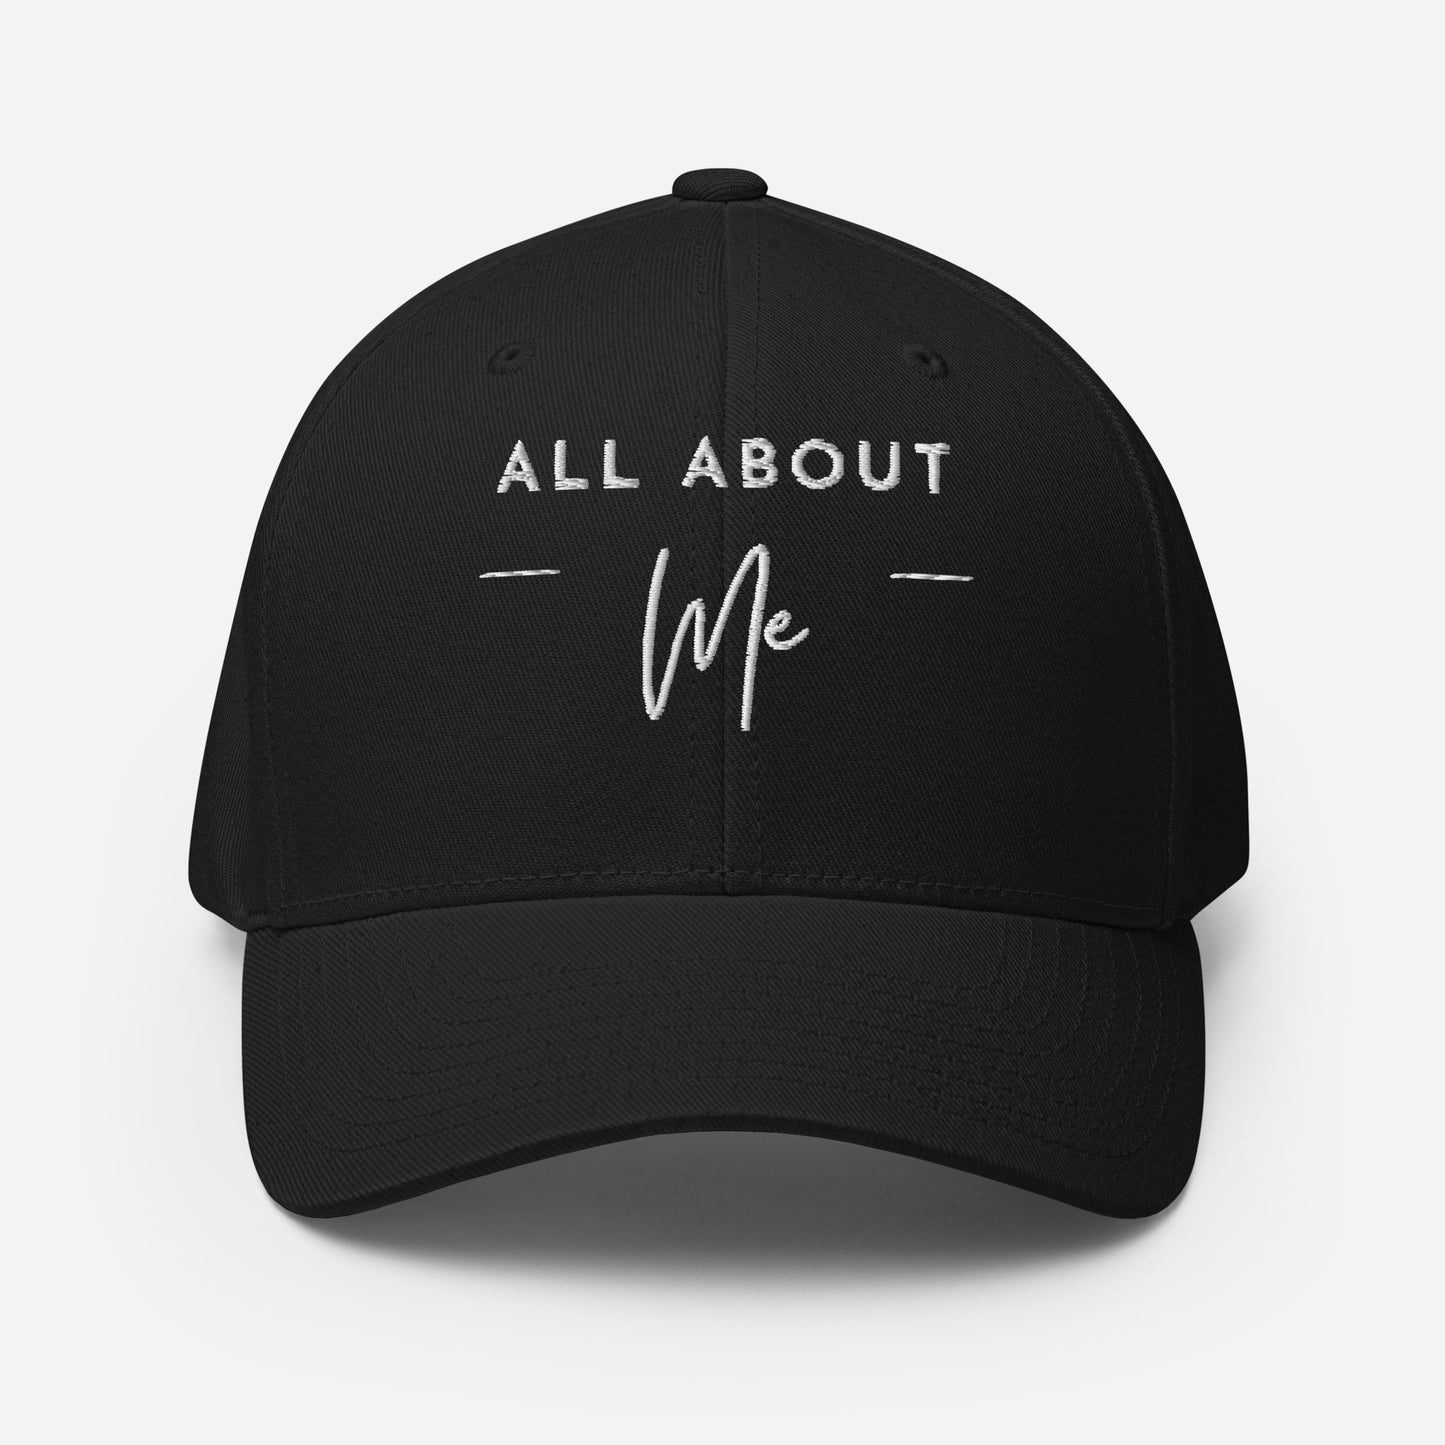 All About Me Embroidered Cap